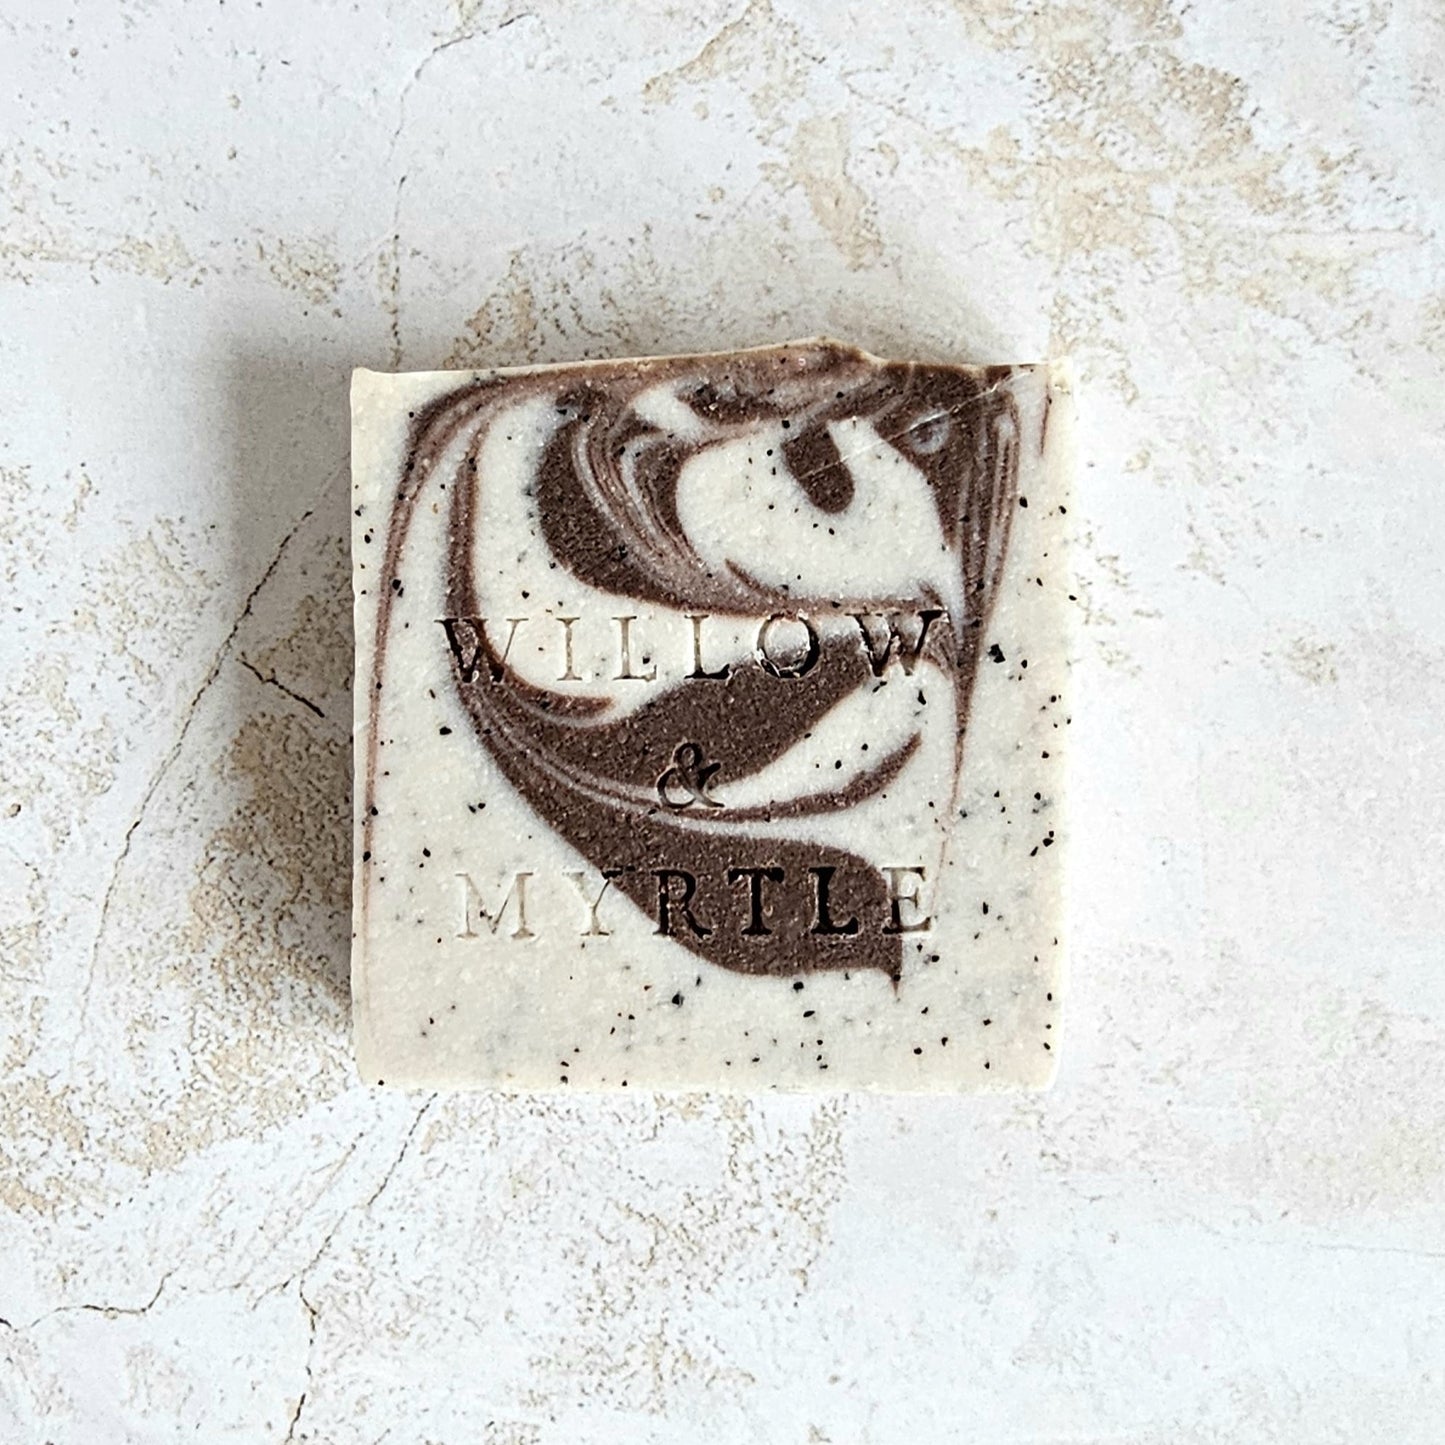 square soap with cocoa swirl and specs of coffee. willow & myrtle logo stamped in front